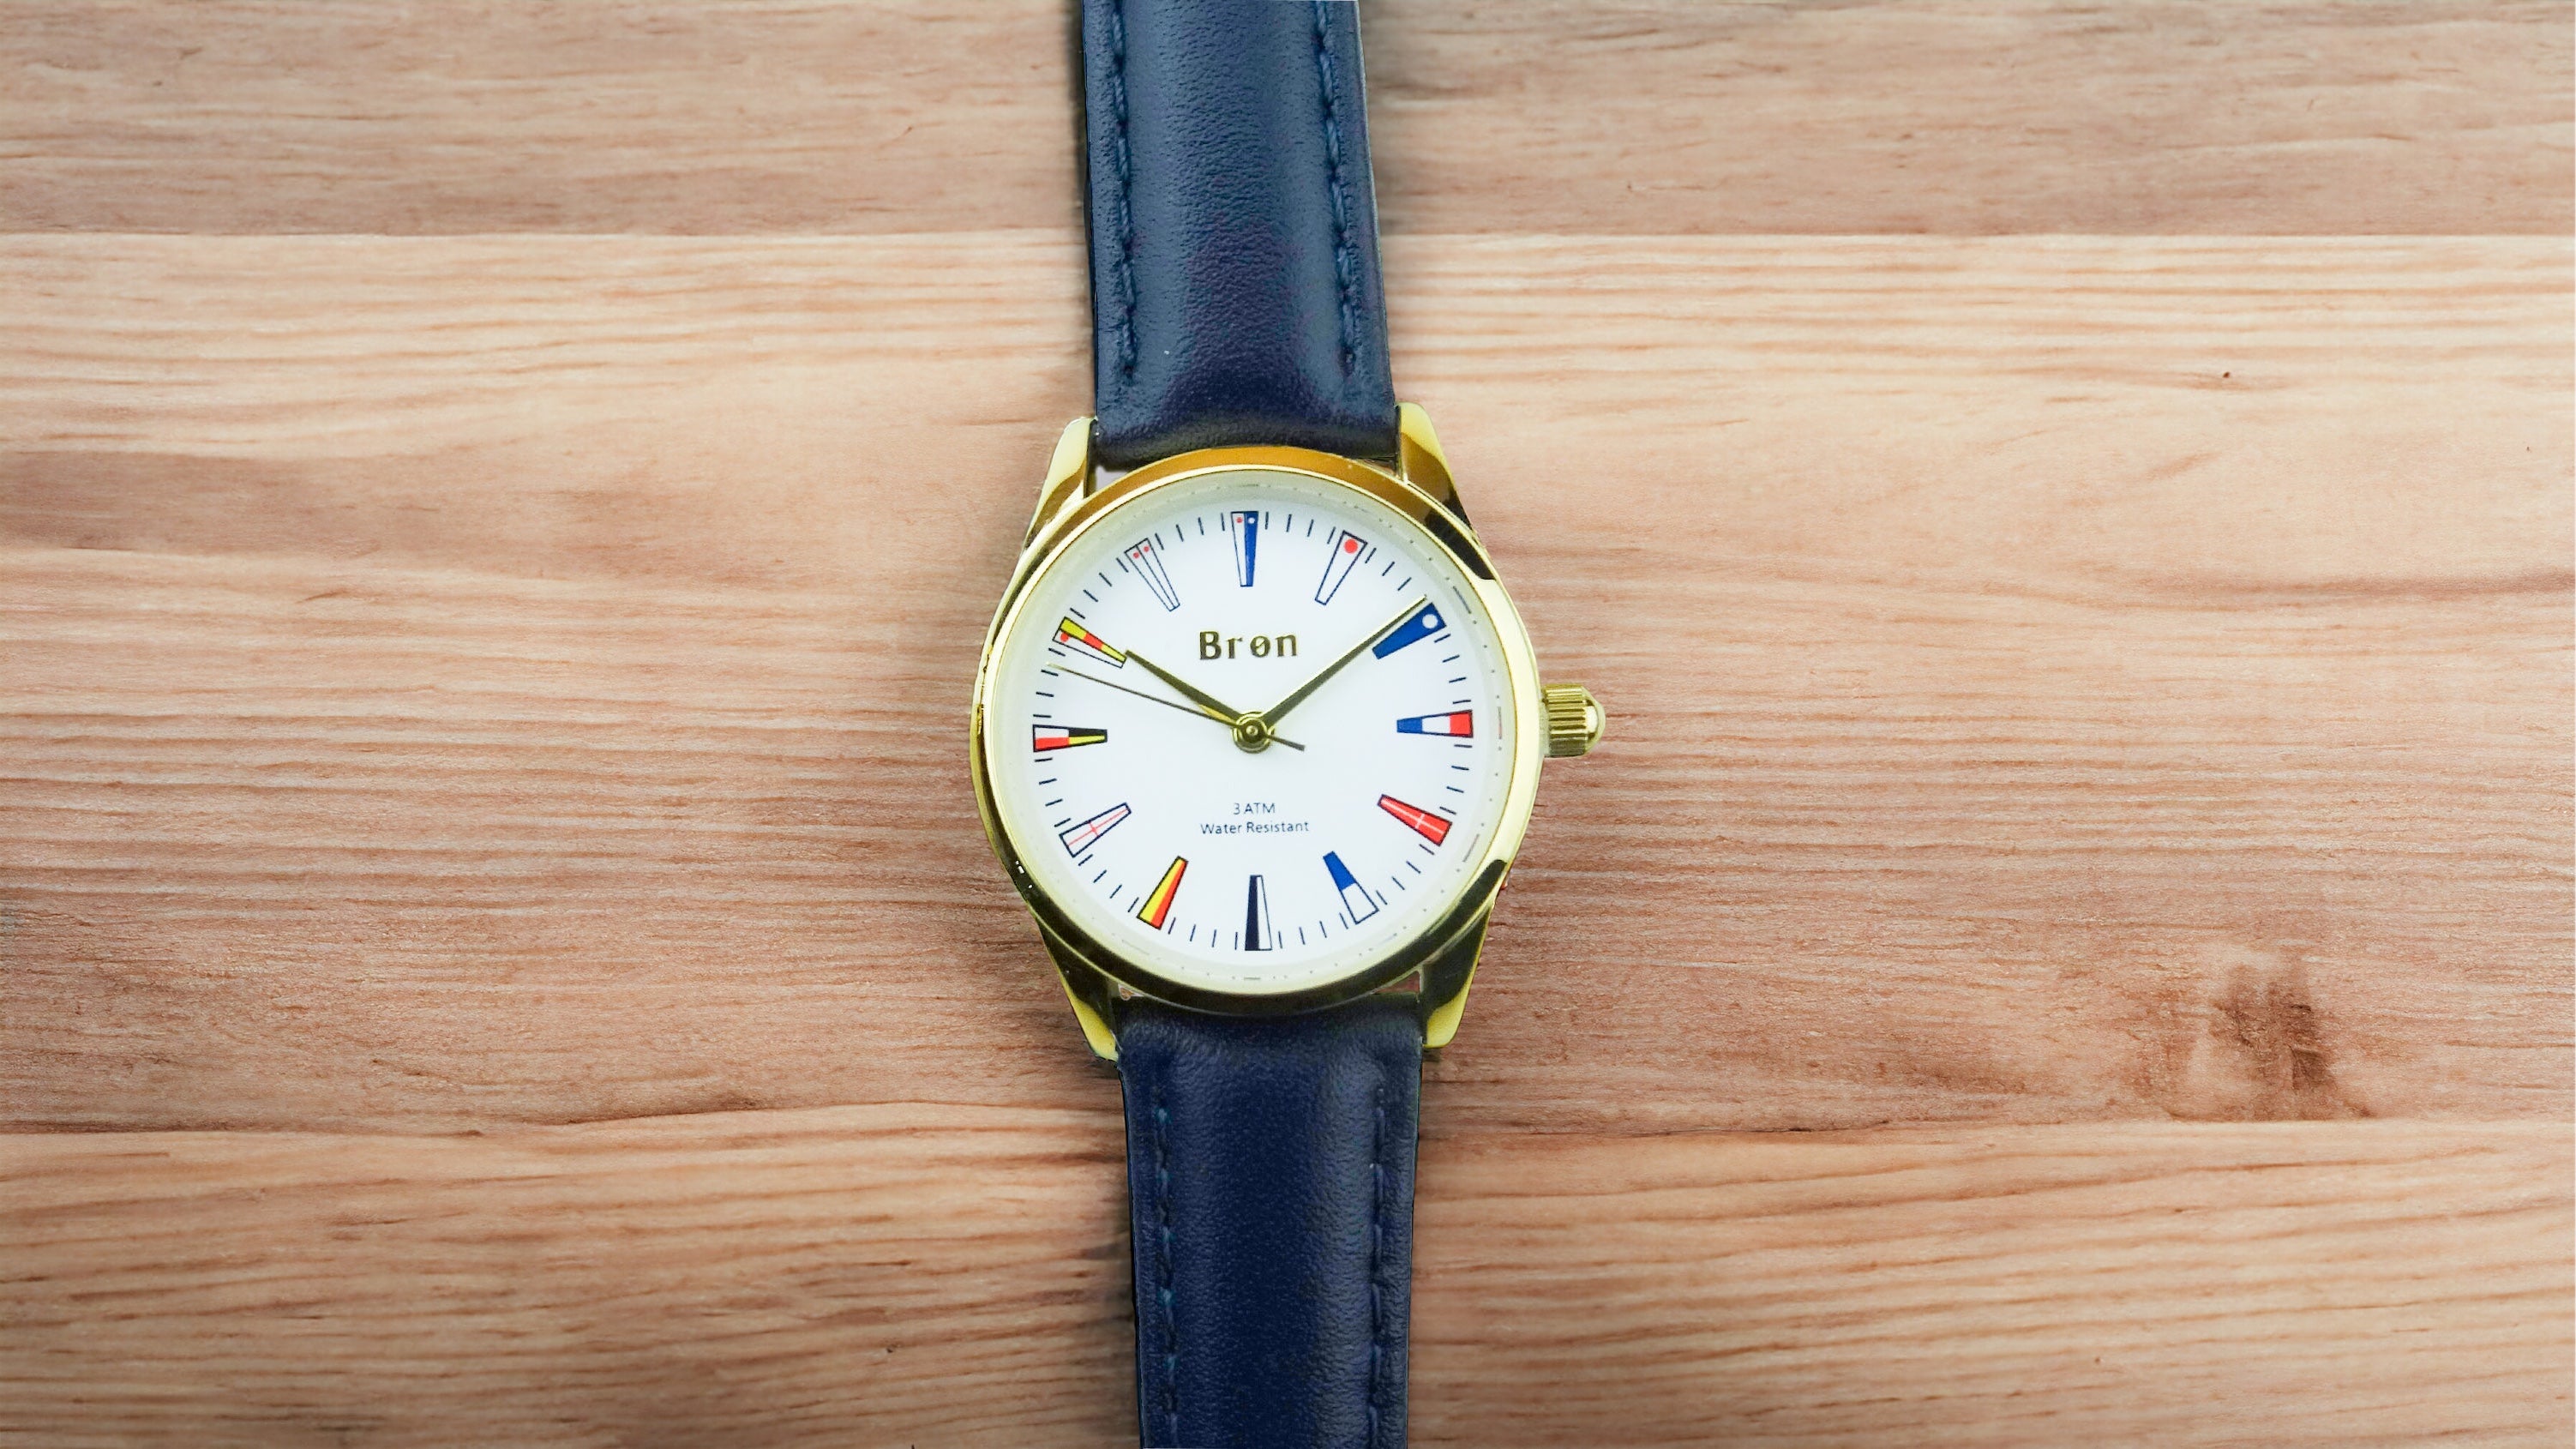 Ladies watch gold with signal flags